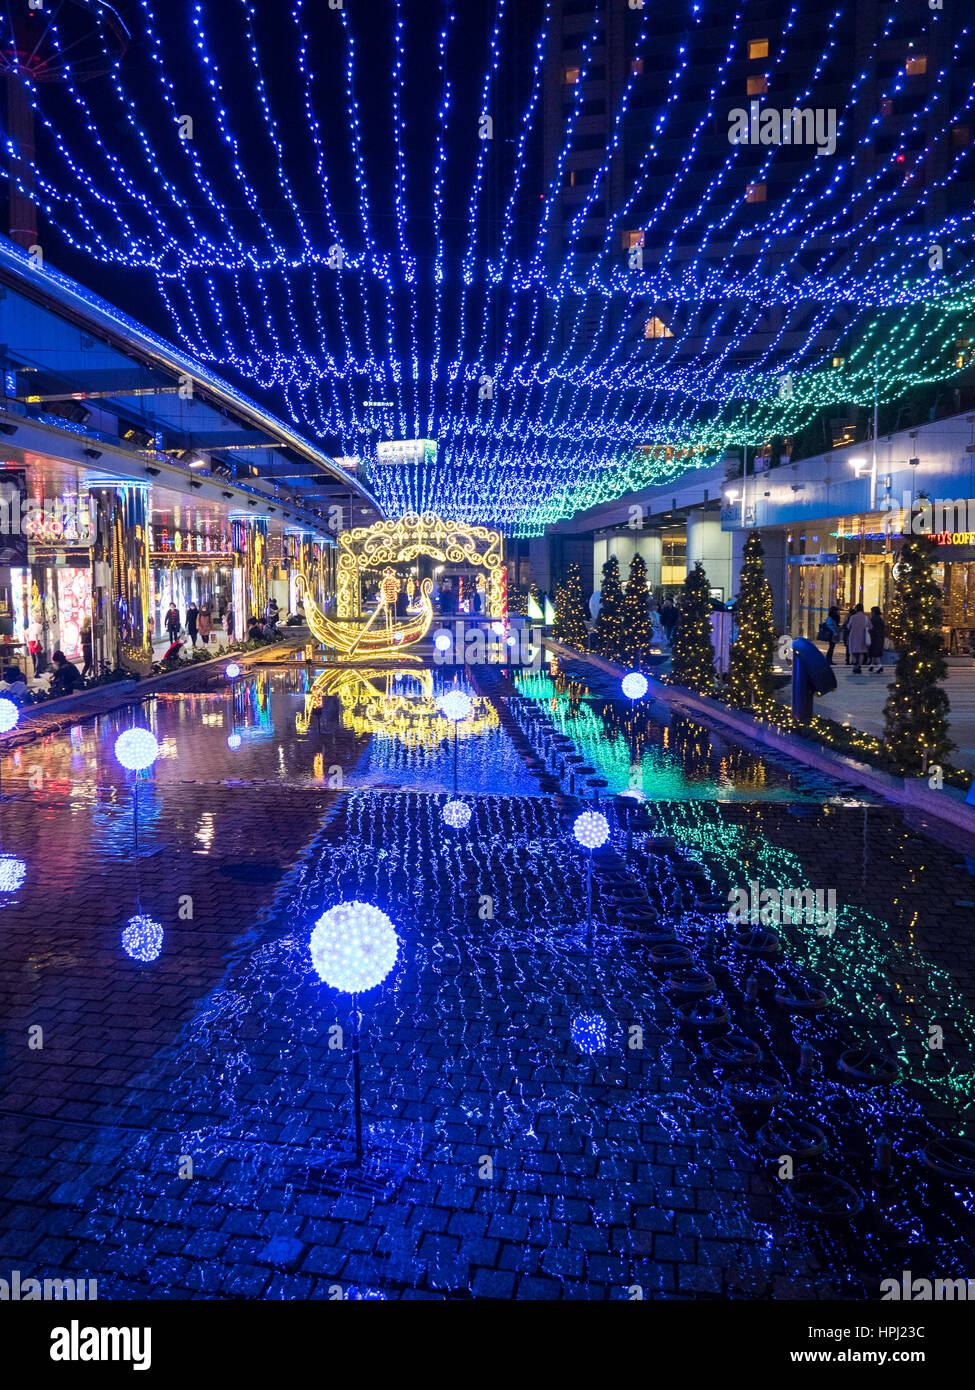 Mock Venetian lighting display is a shopping arcade in Tokyo Dome City. Stock Photo